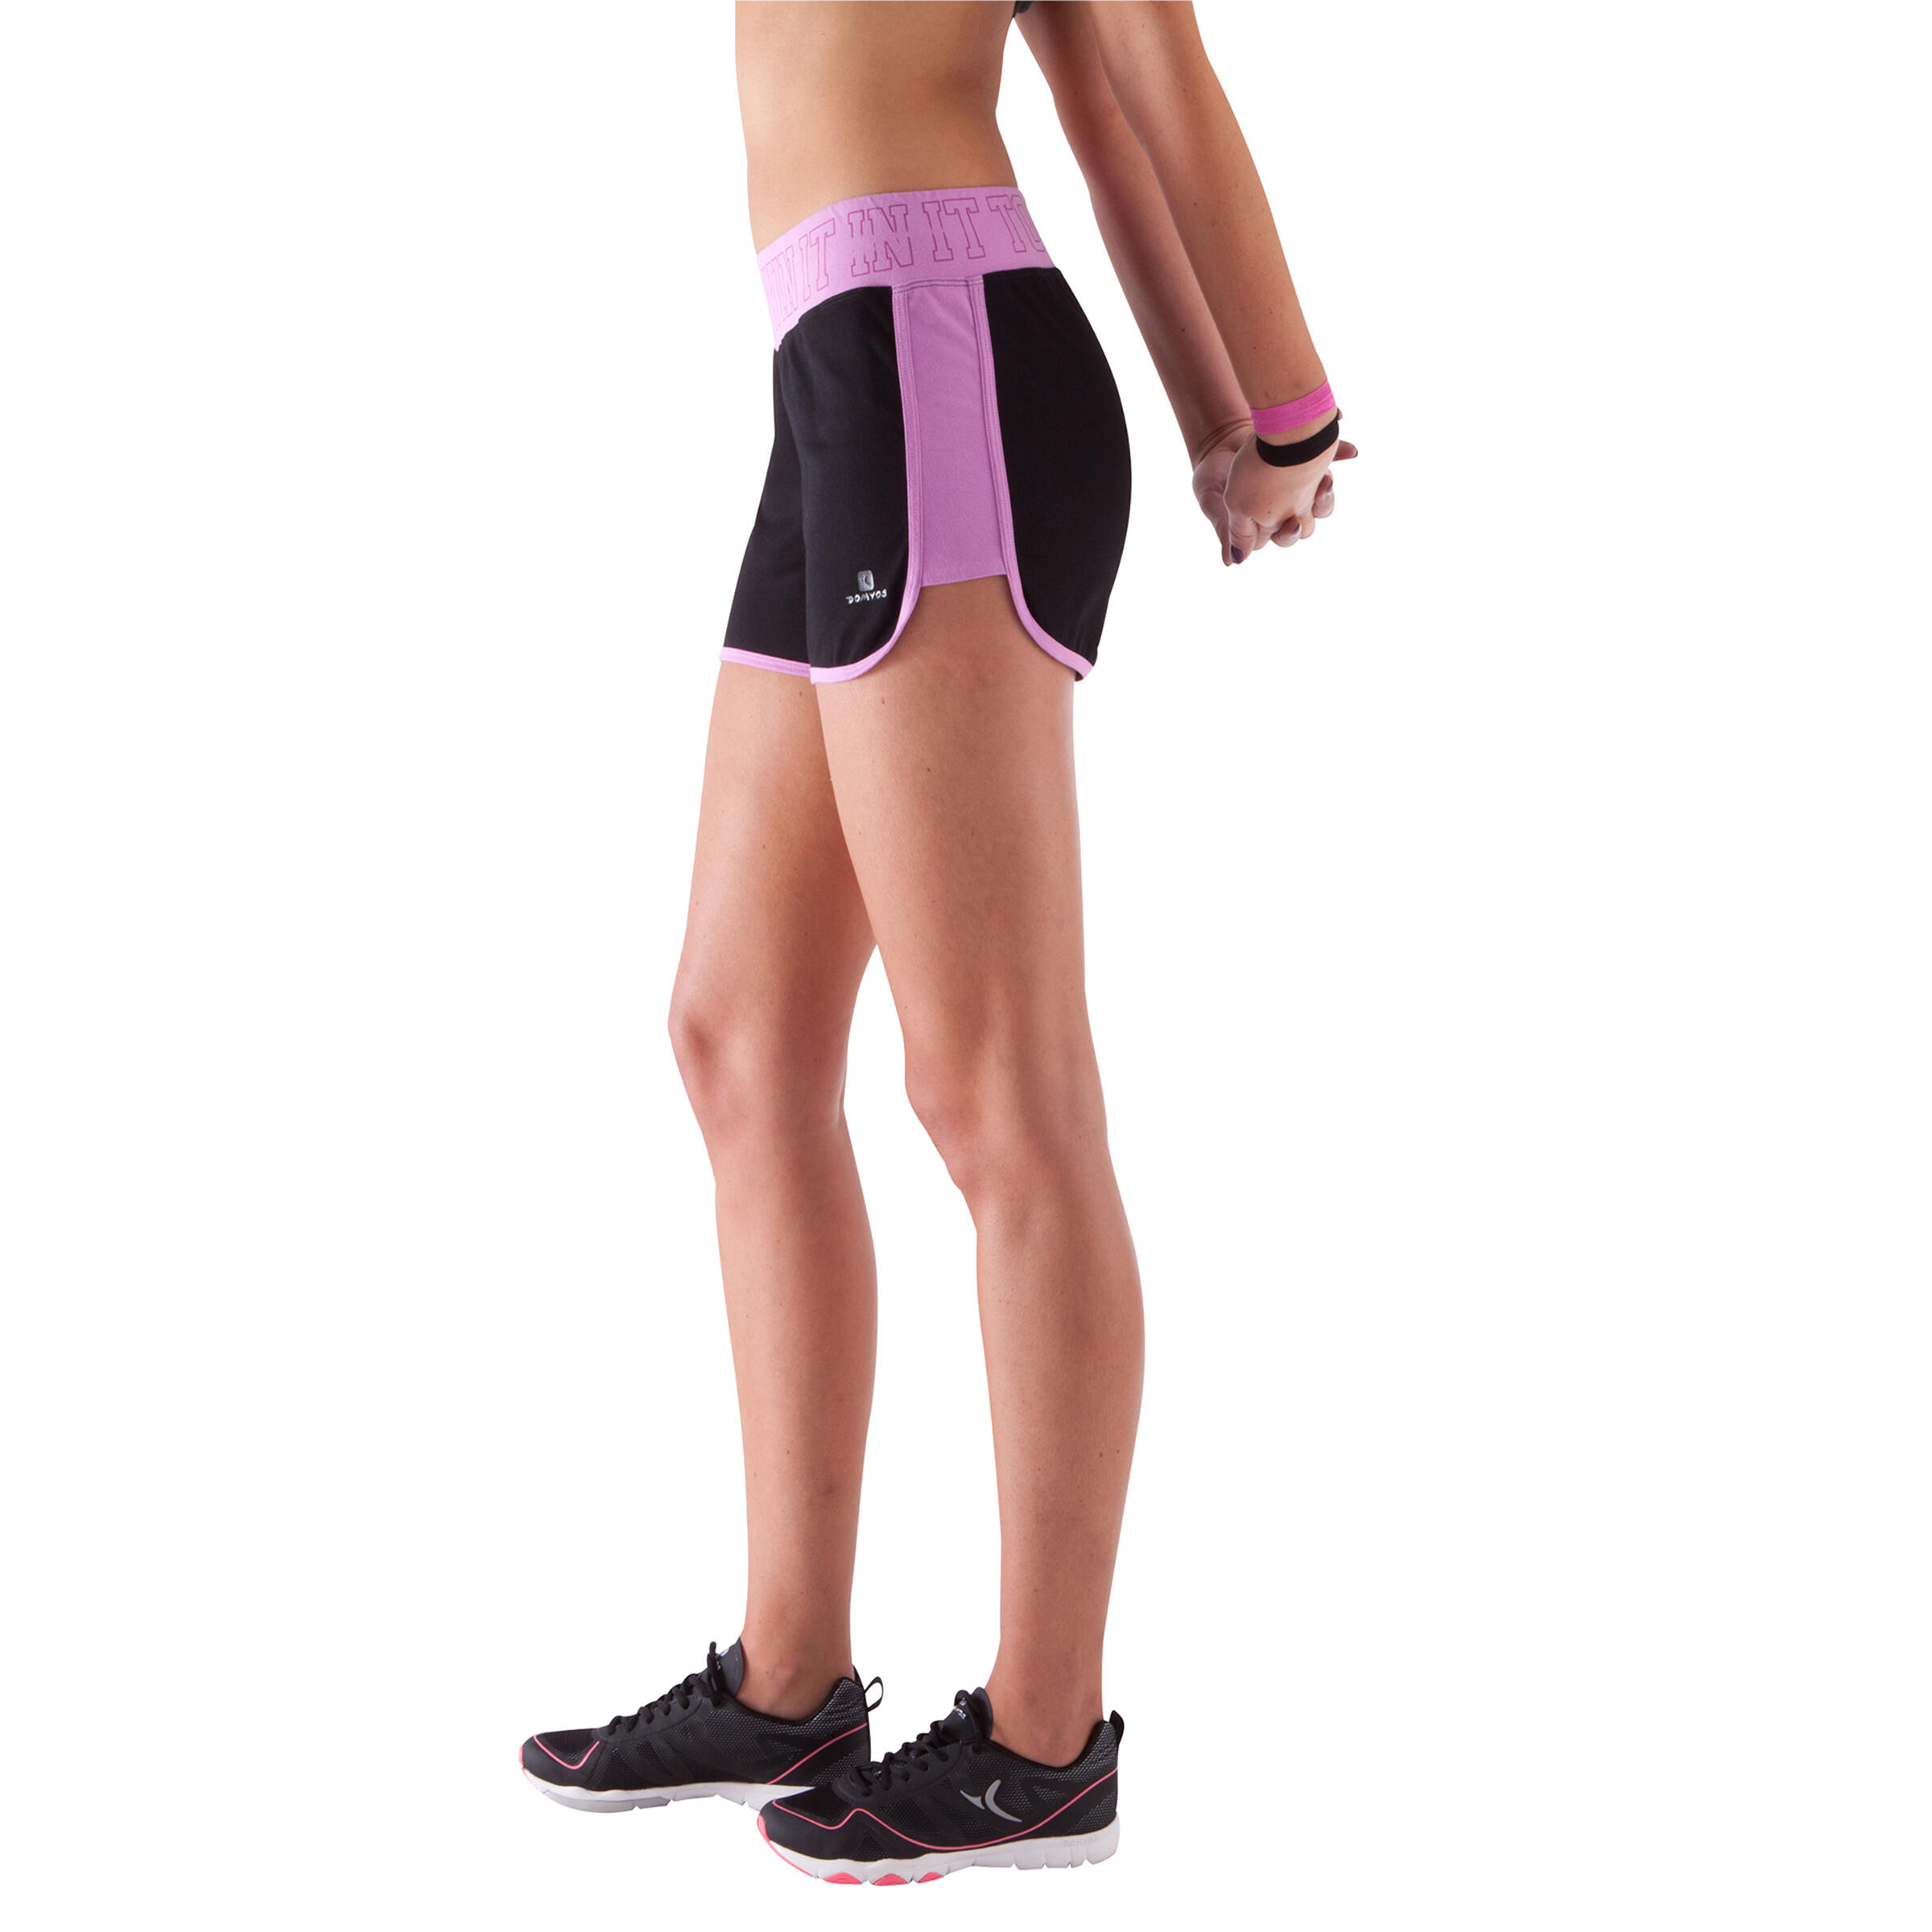 Women's Fitness Shorts with Contrasting Print Waistband - Black/Pink 5/11